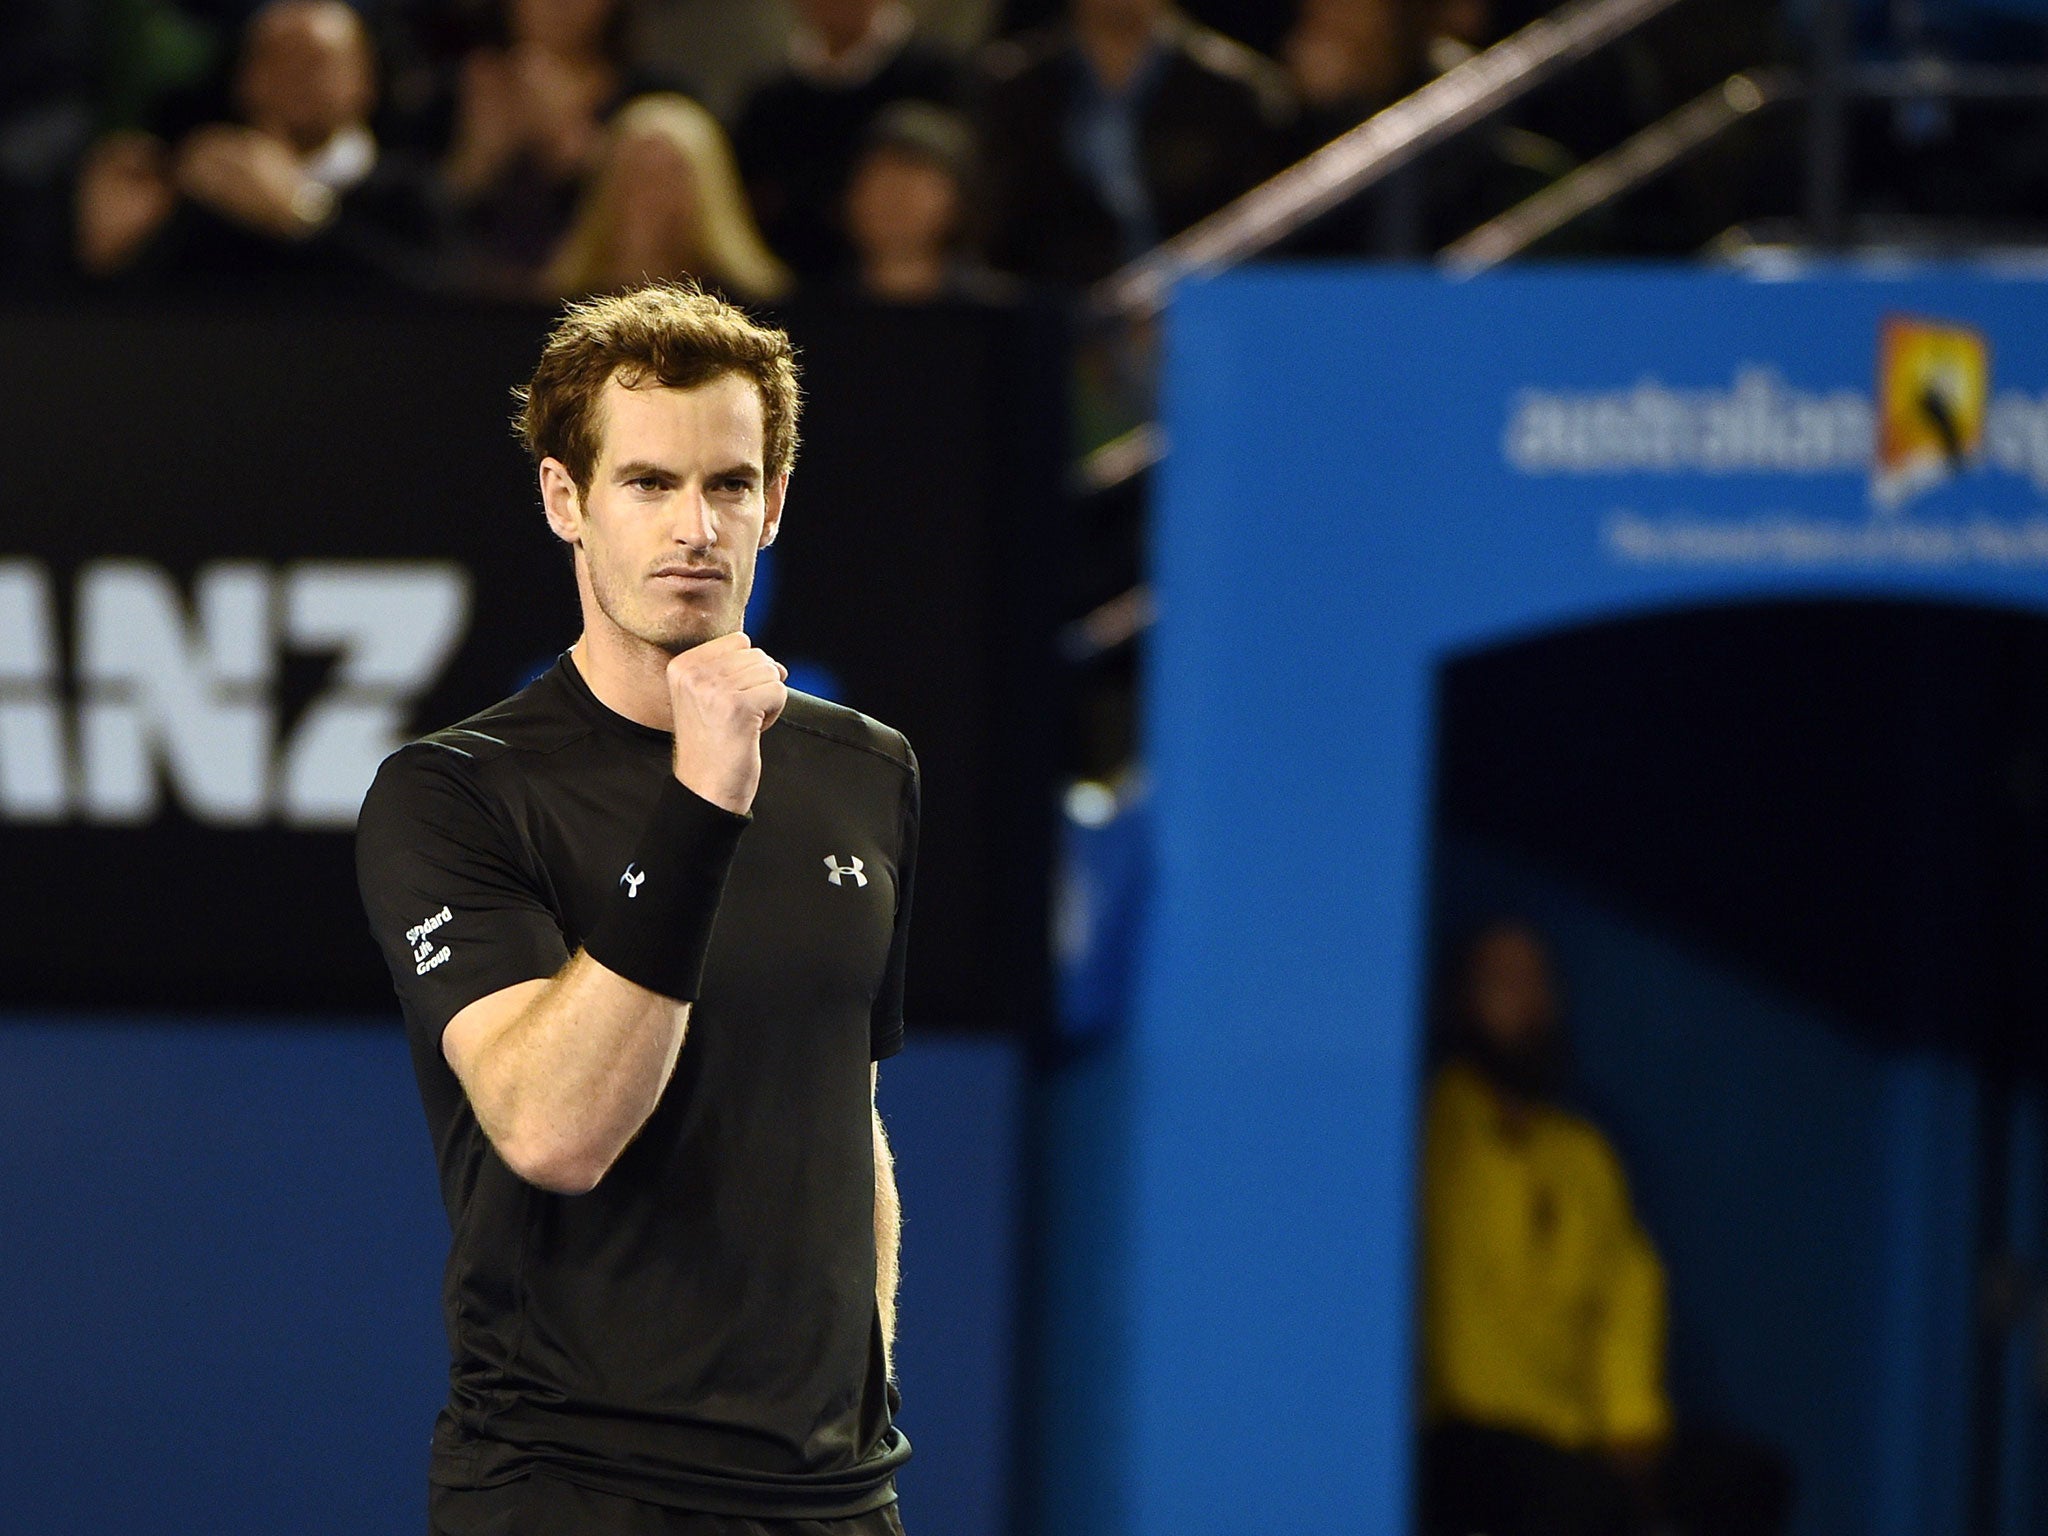 Andy Murray celebrates the victory over Nick Kyrgios in the Australian Open quarter-finals